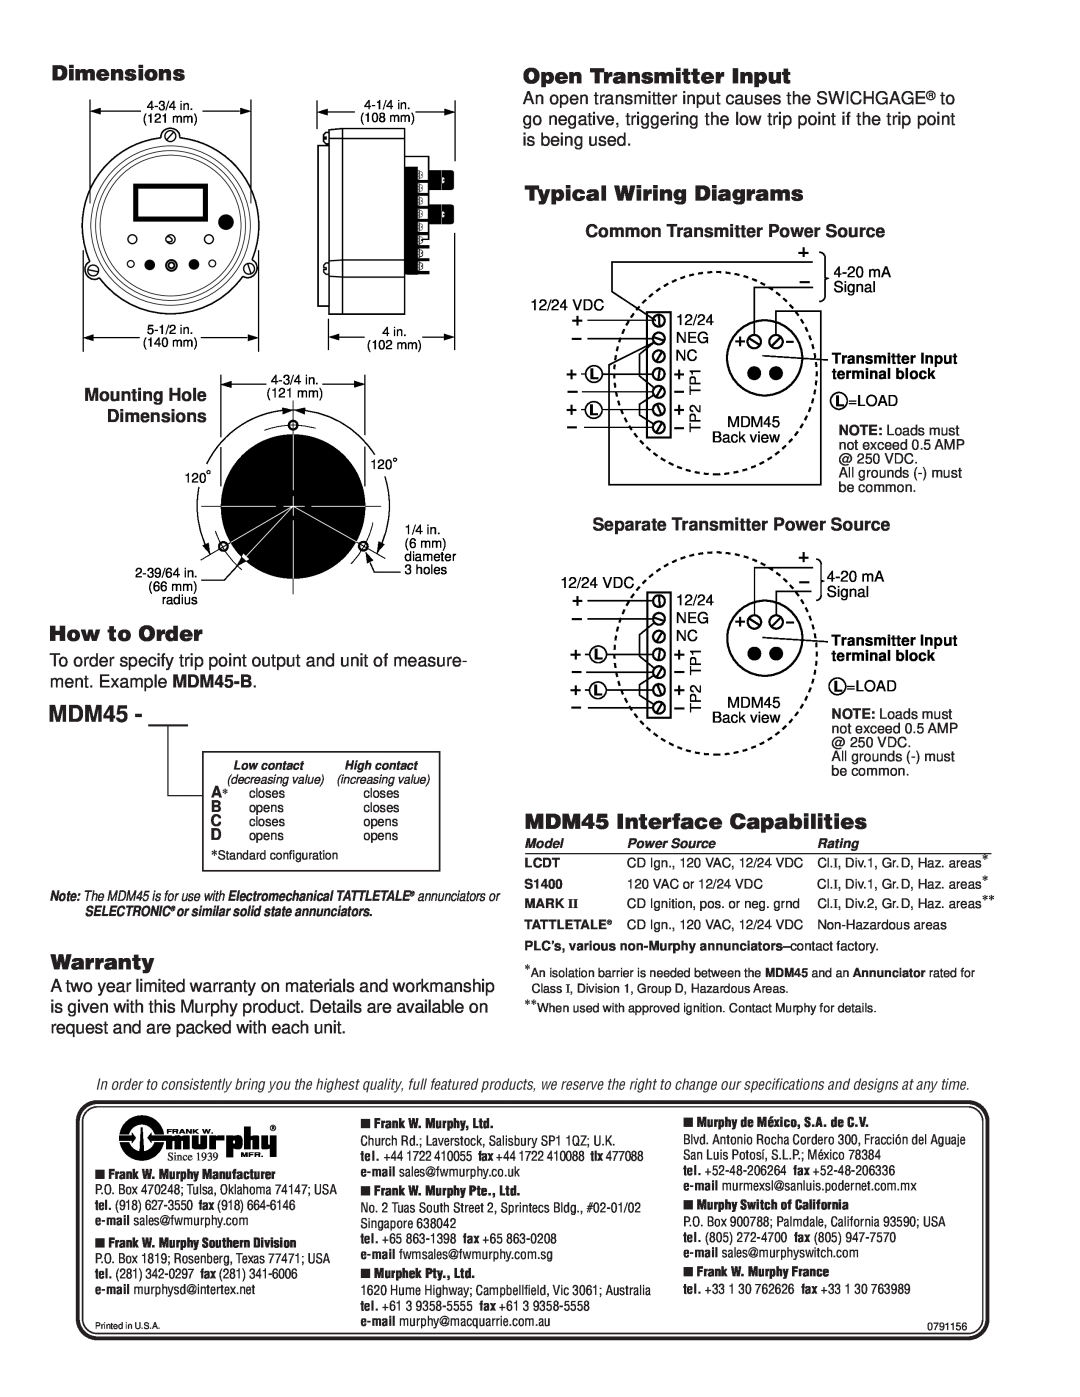 Murphy Dimensions, Open Transmitter Input, Typical Wiring Diagrams, How to Order, MDM45 Interface Capabilities 